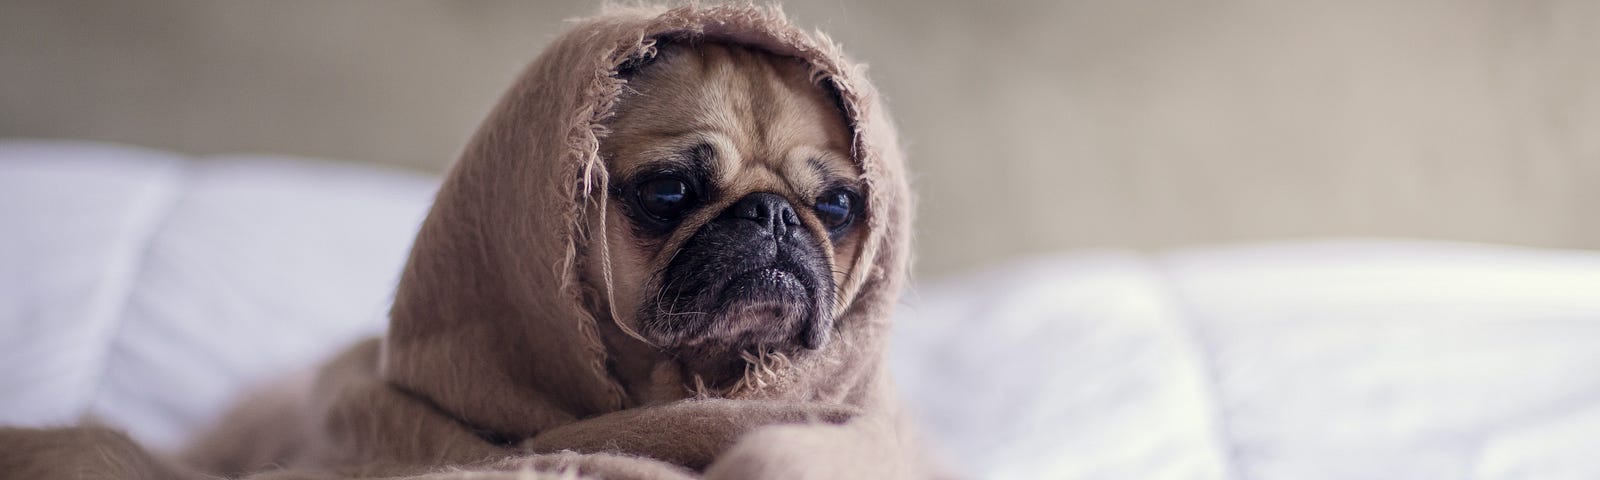 A pug wrapped in blanket photo.